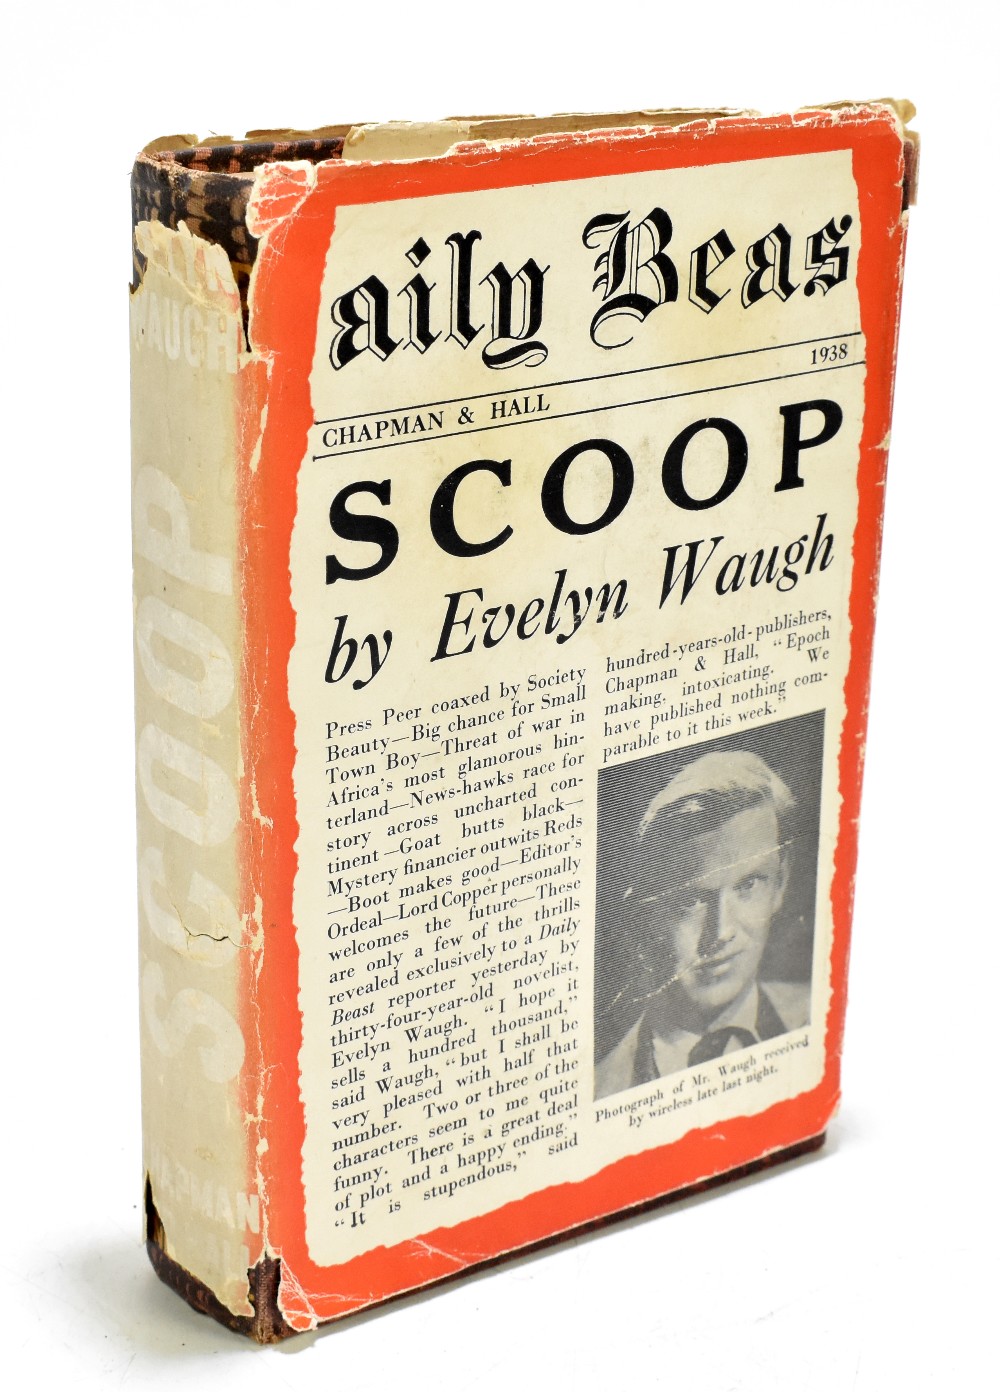 WAUGH (E); SCOOP, first edition, with raised 8 to the publication date, and ‘a’ rather than ‘as’